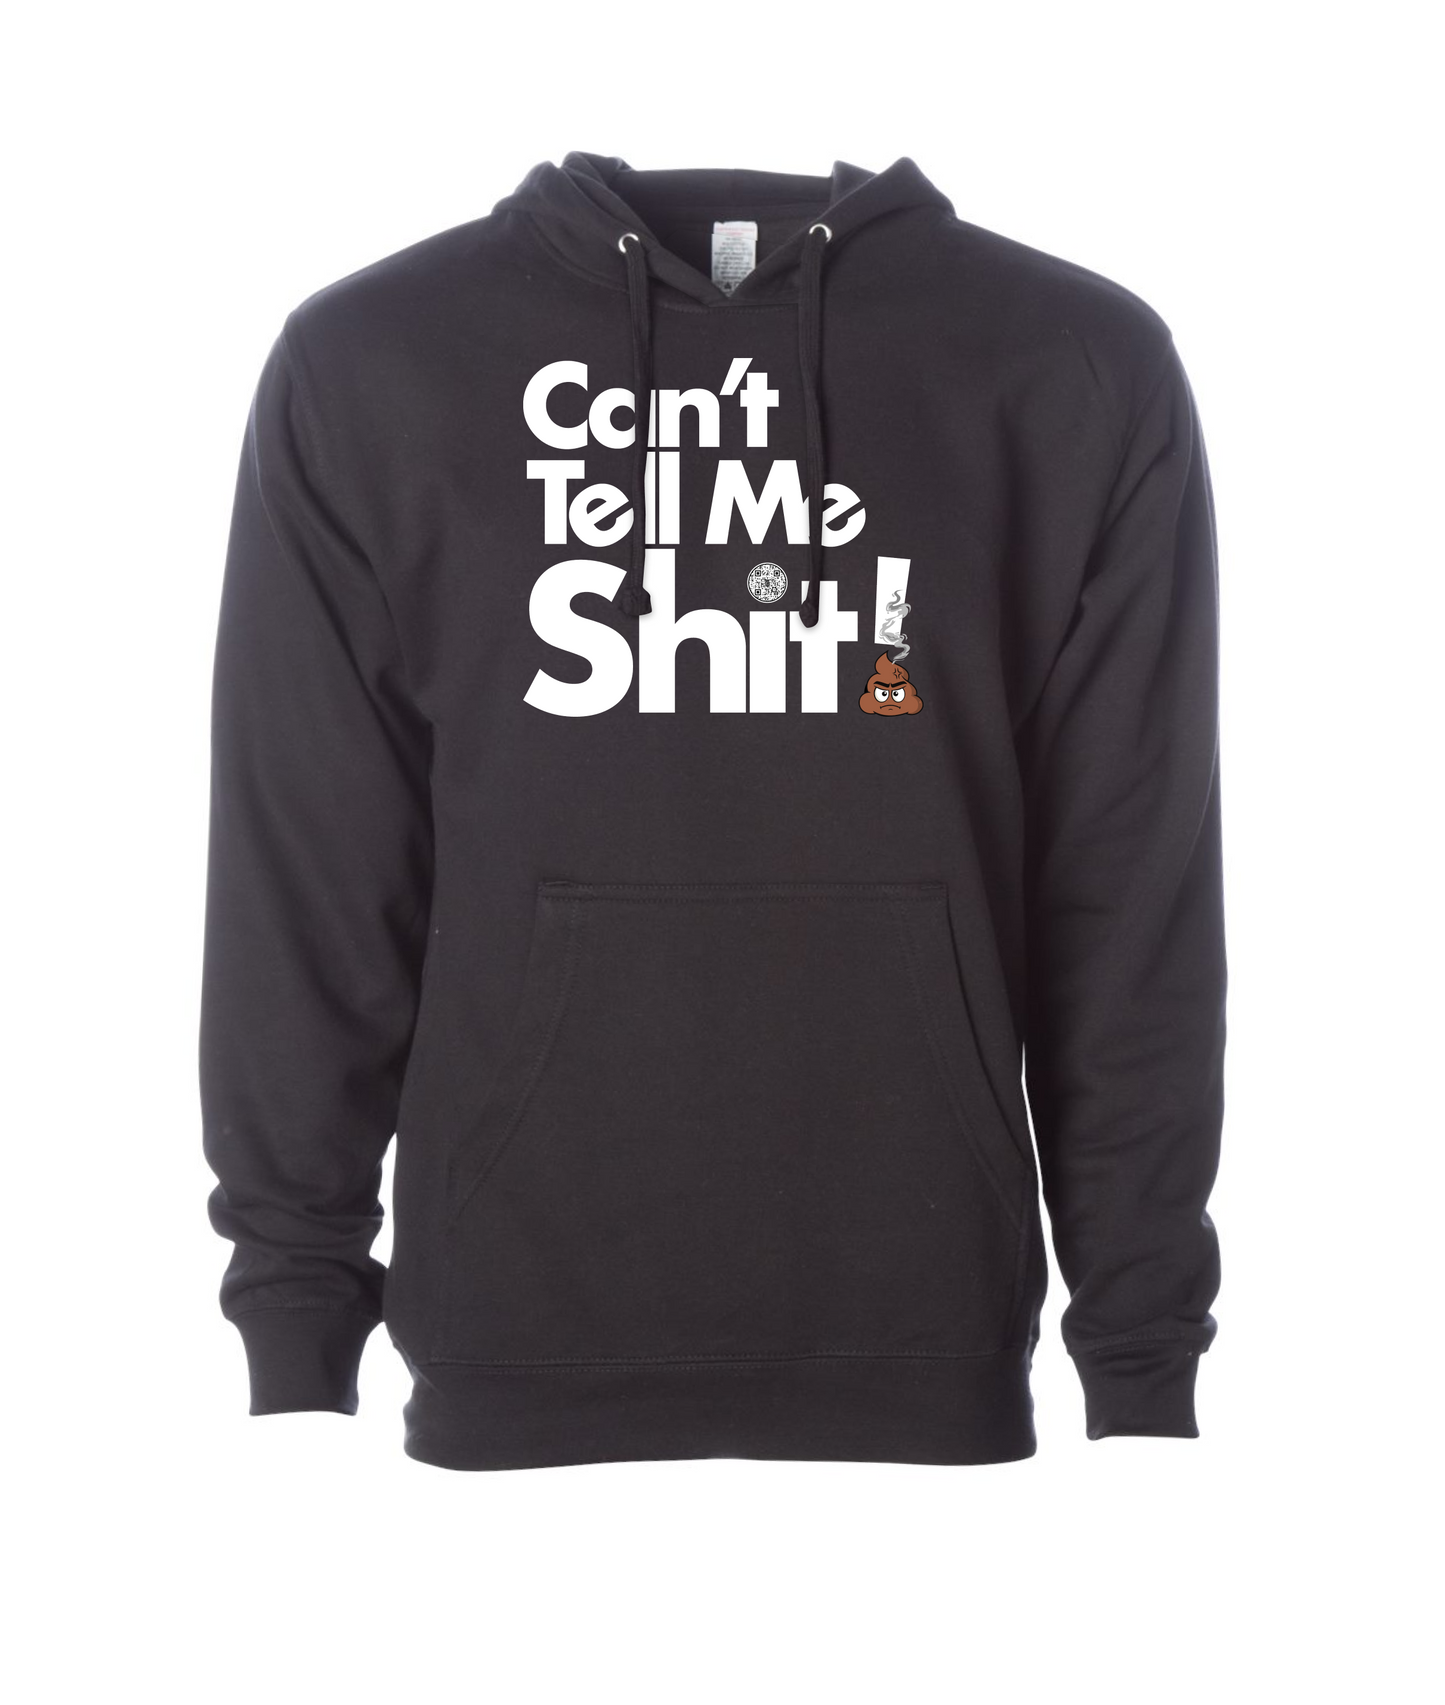 Seefor Yourself - Can't Tell Me Shit - Black Hoodie